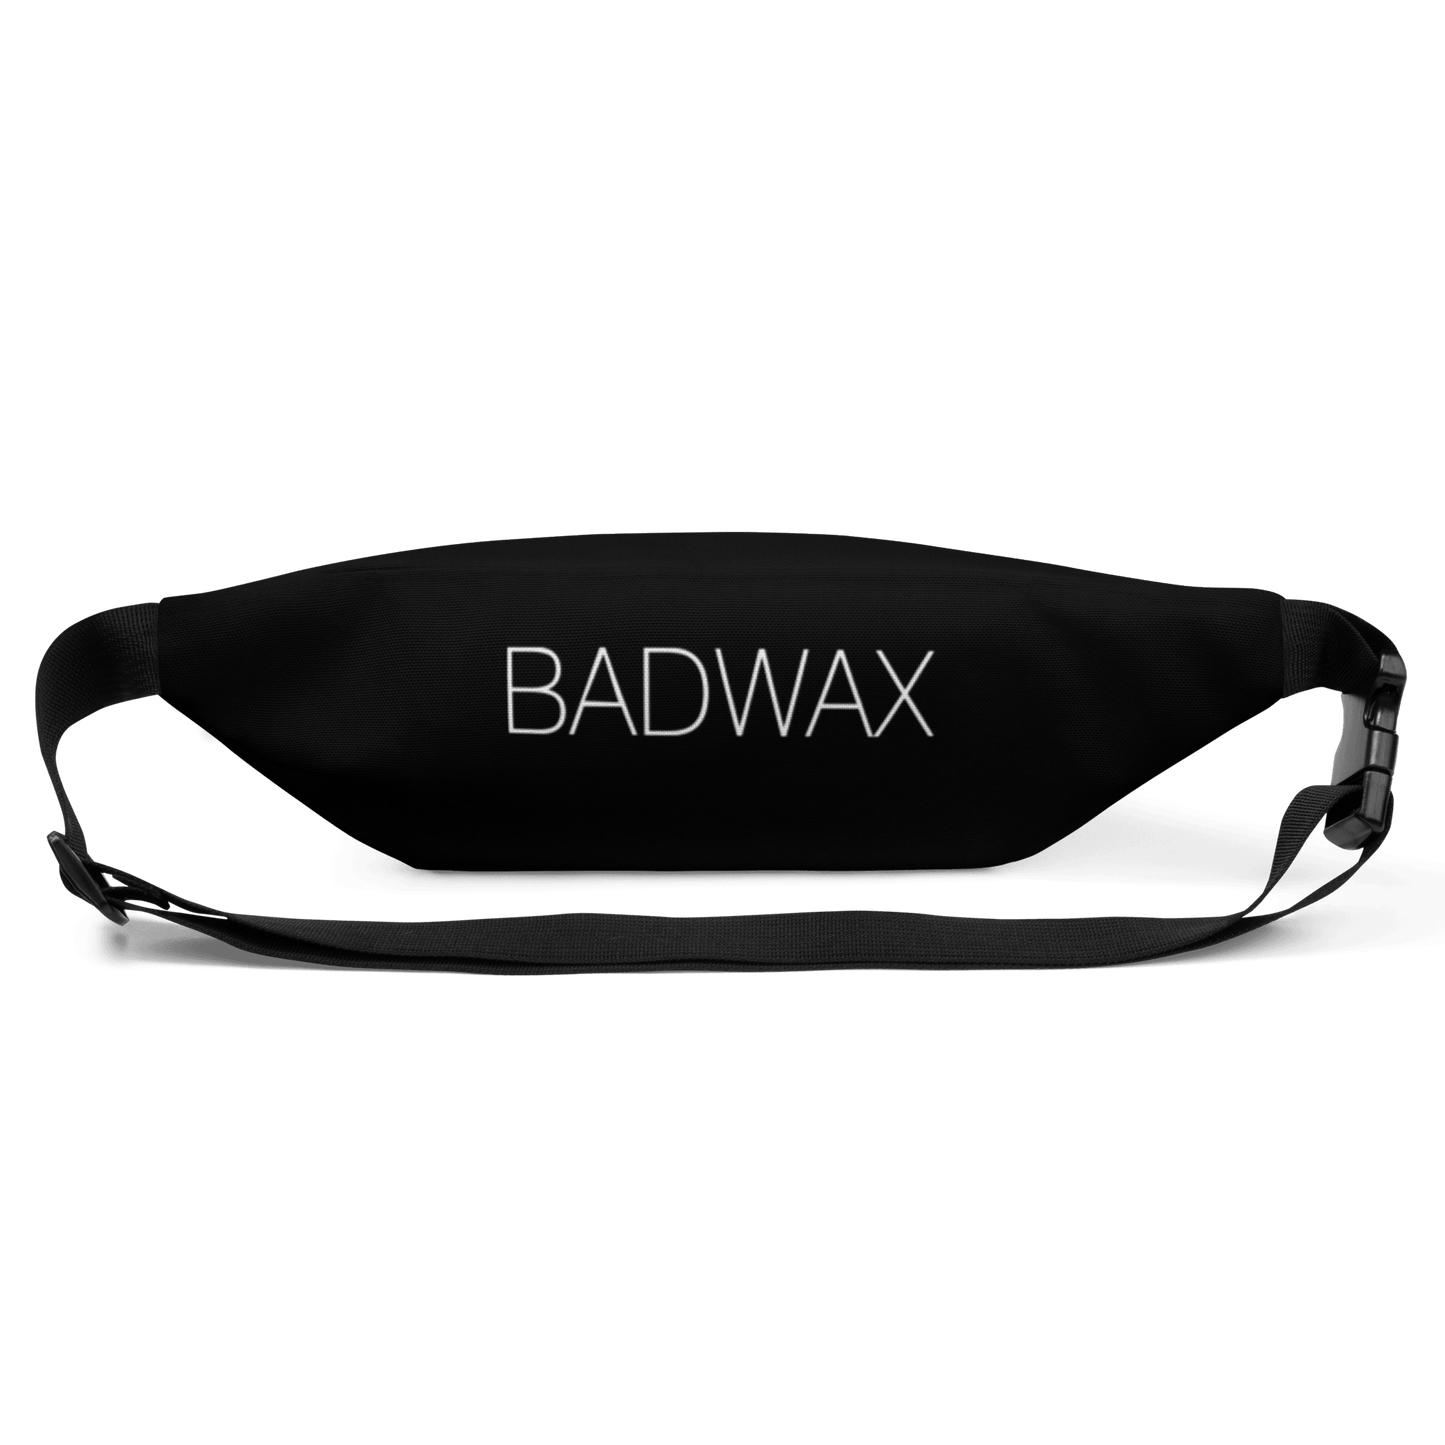 Funny Not Drugs Fanny Pack - Fanny Pack